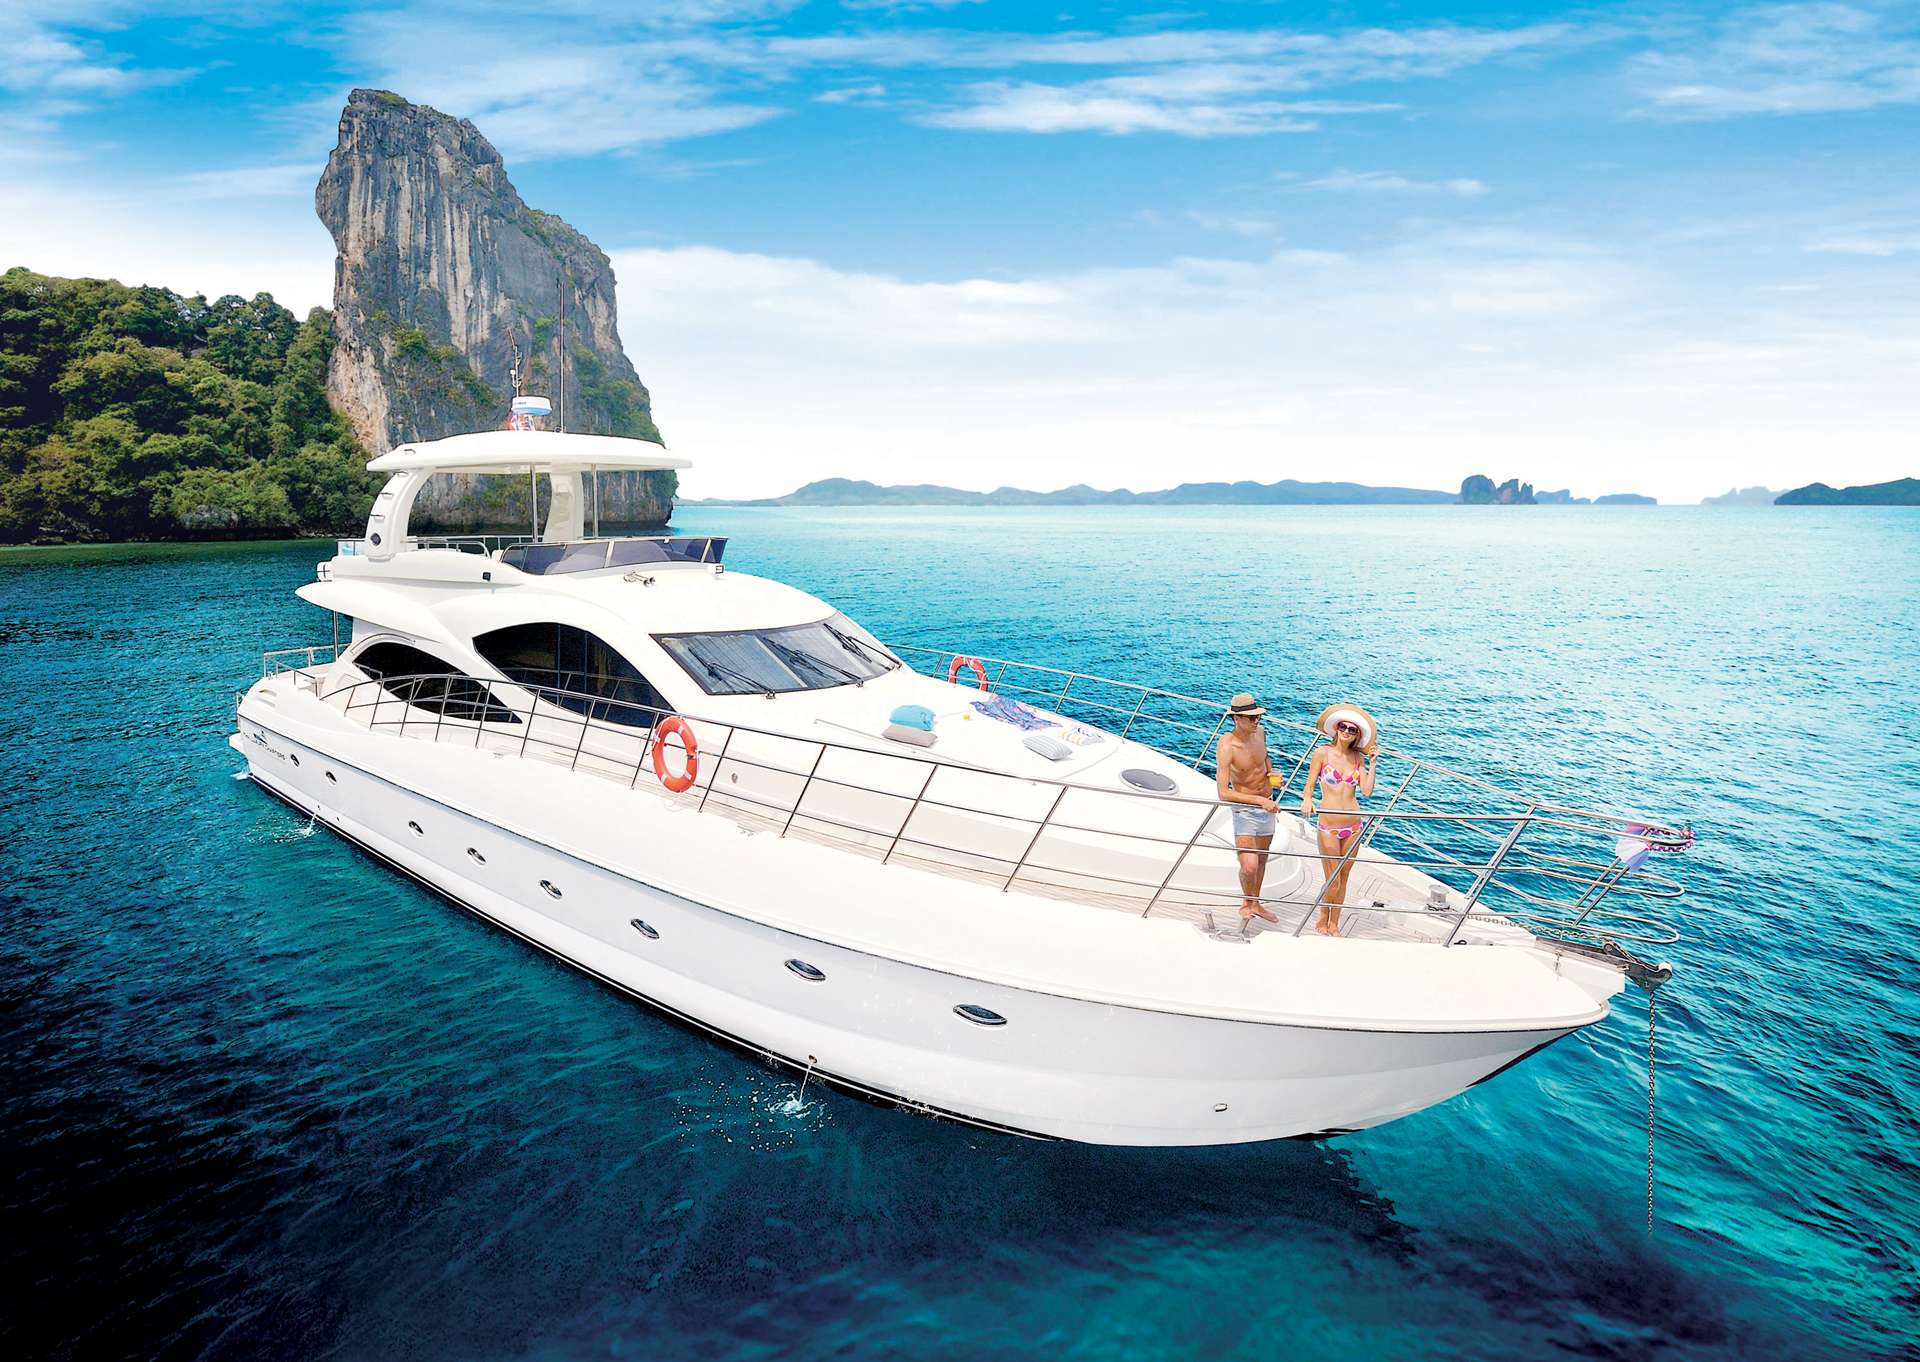 lady kathryn - Yacht Charter Philippines & Boat hire in SE Asia 1